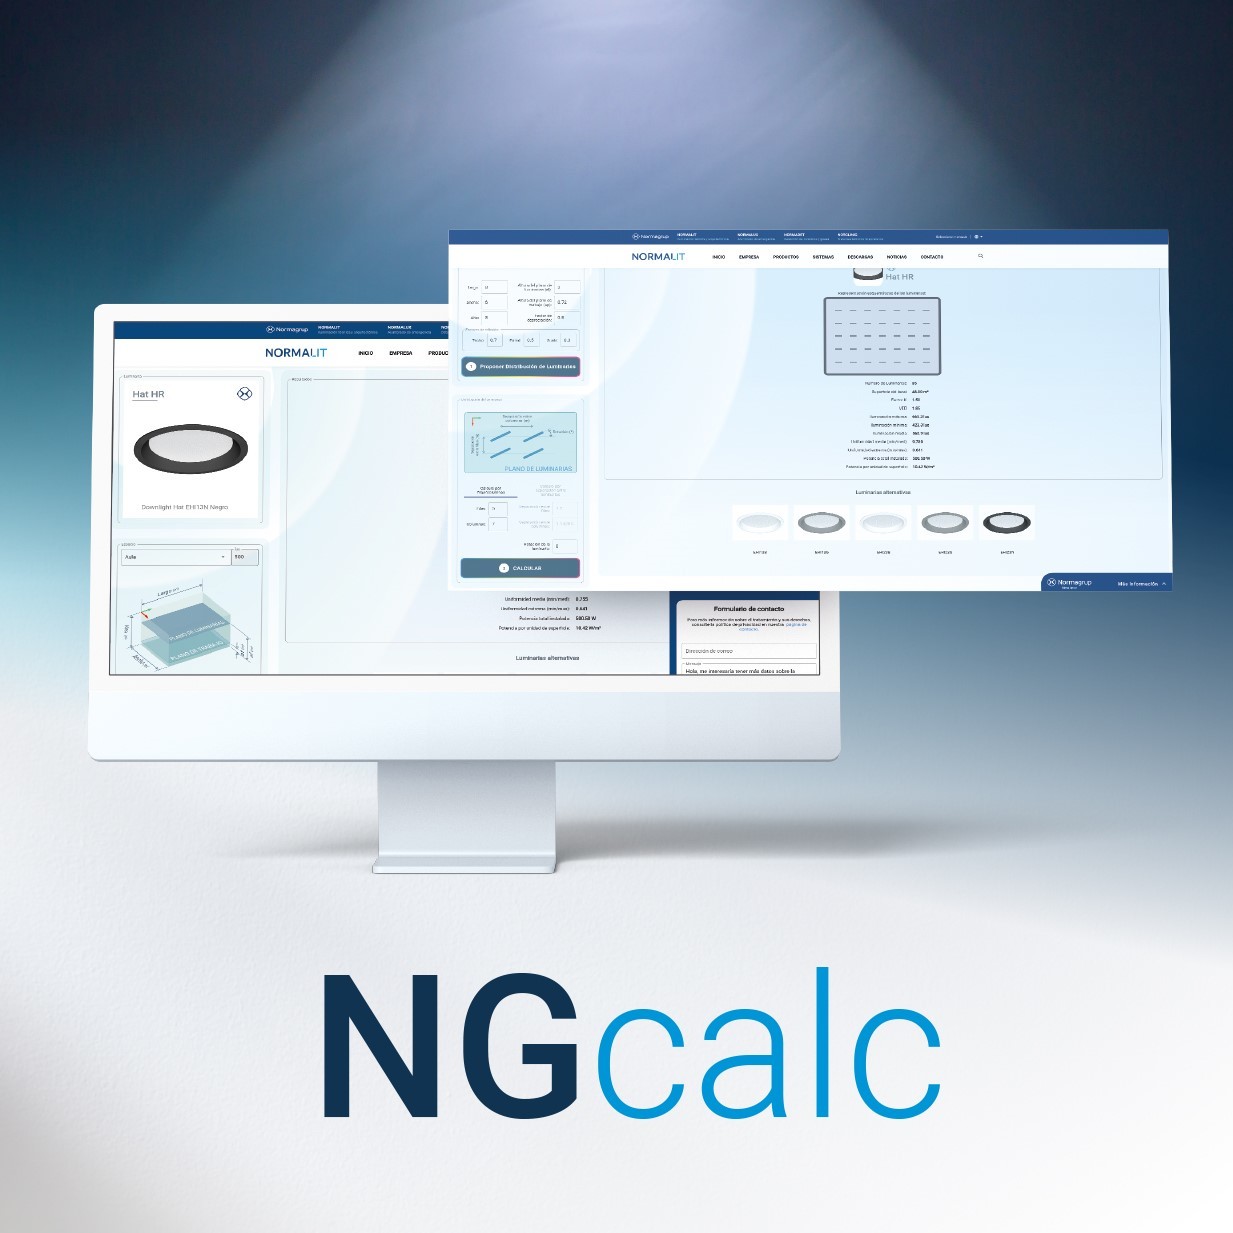 NG Calc, the new app for luminotechnical calculation developed by Normagrup